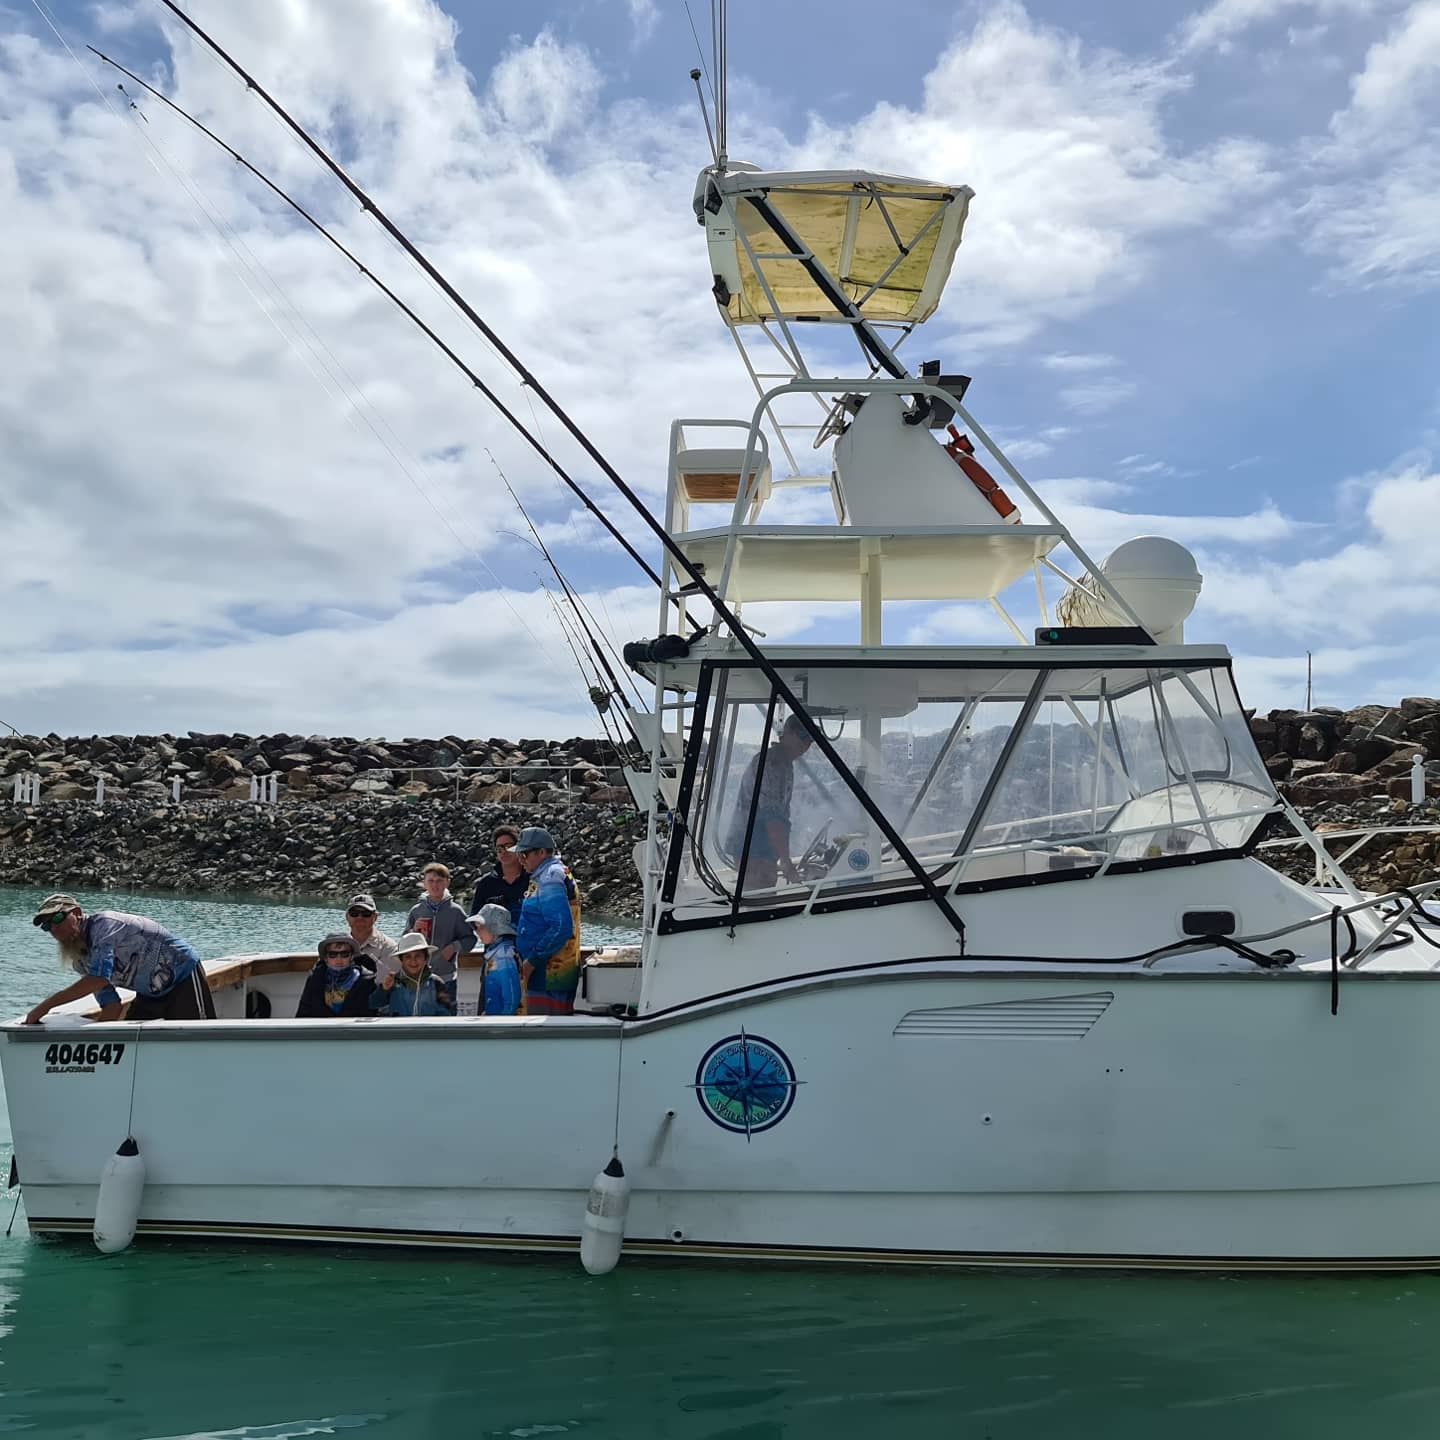 Afternoon Private Fishing Charter Airlie Beach Whitsundays Islands